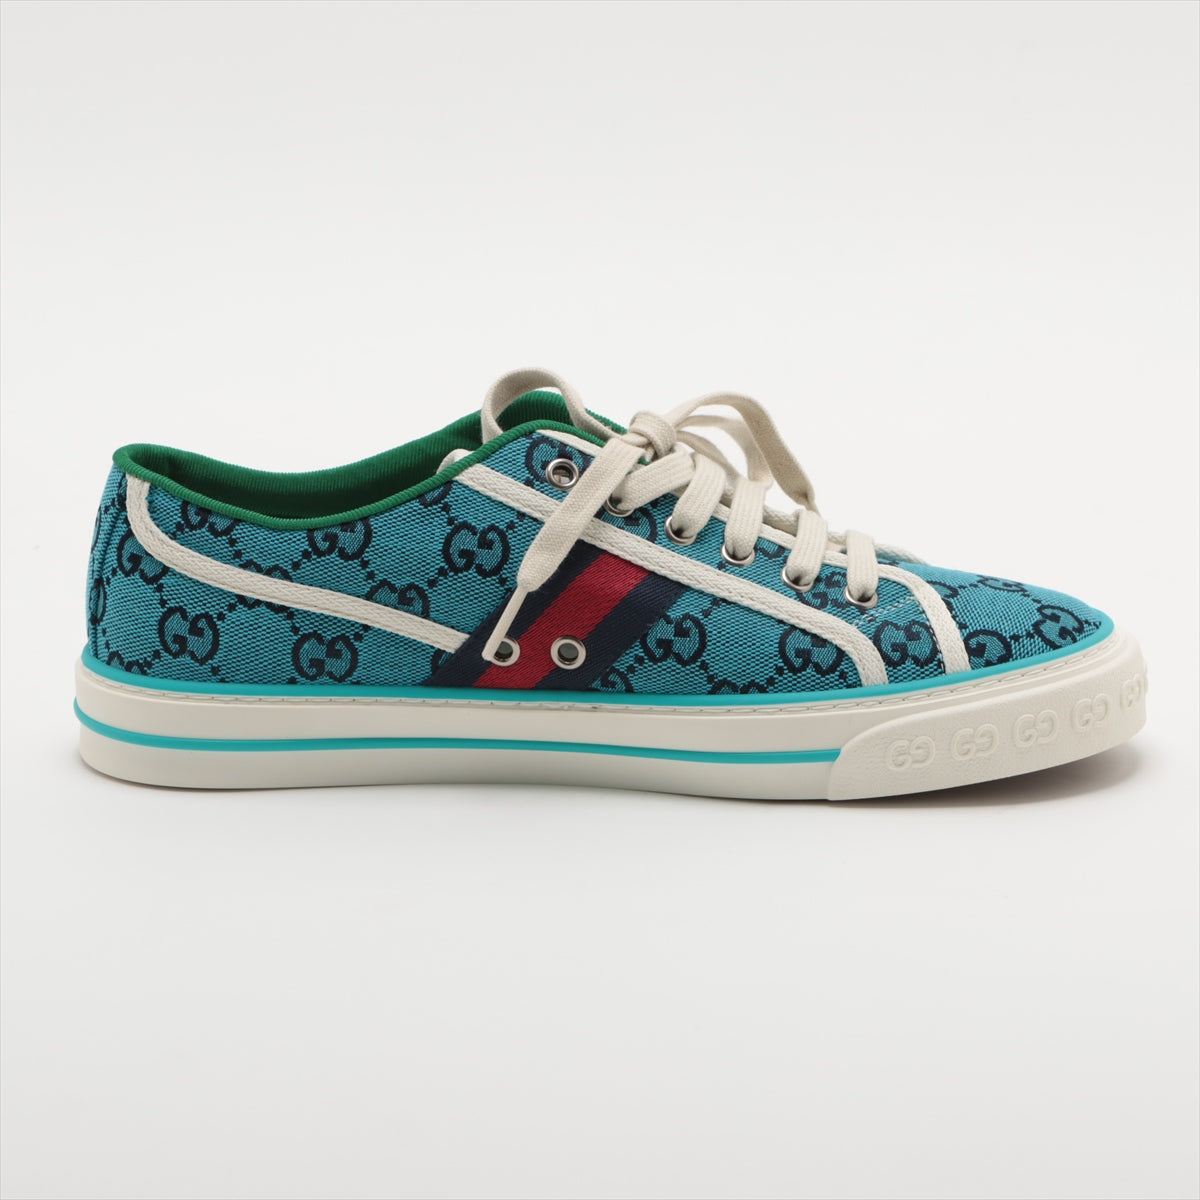 Gucci Tennis 1977 canvas Sneakers 6.5 Men's Blue x white GG Canvas Sherry Line